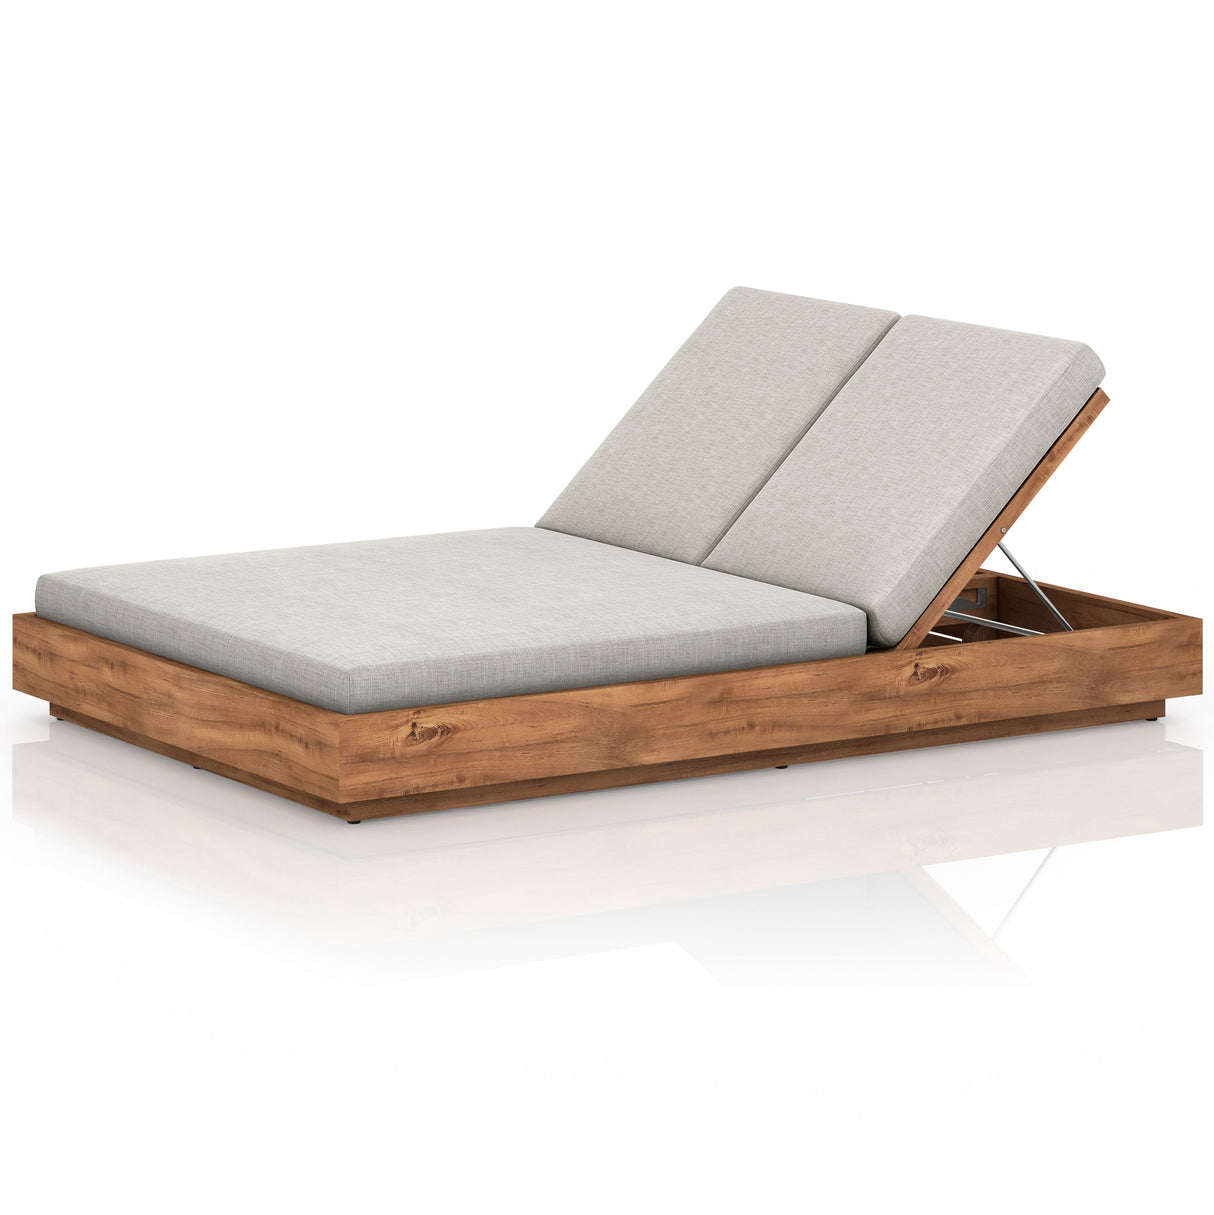 Four Hands Kinta Outdoor Double Chaise Lounge Furniture